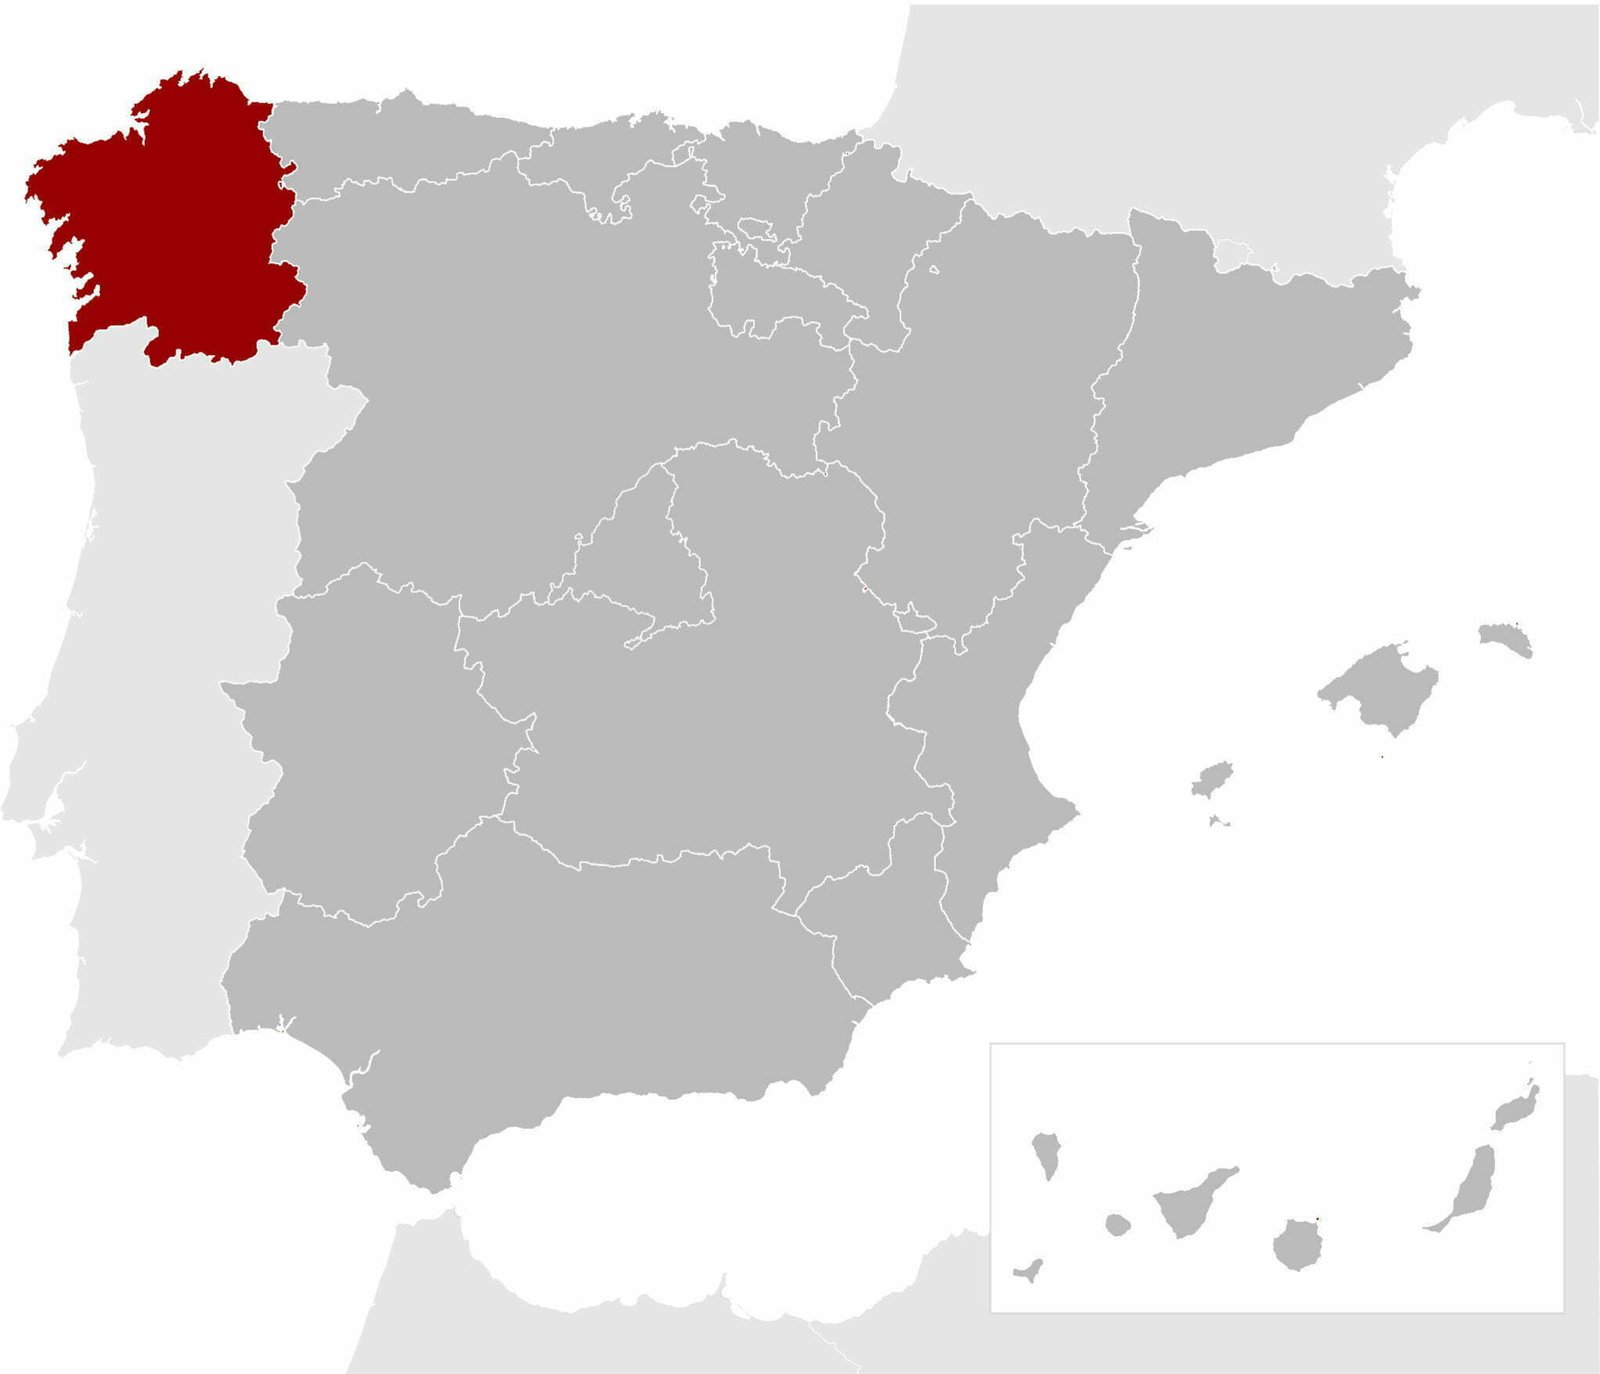 A regional map of Spain detailig the boundaries and location of the Galicia region in the northwest